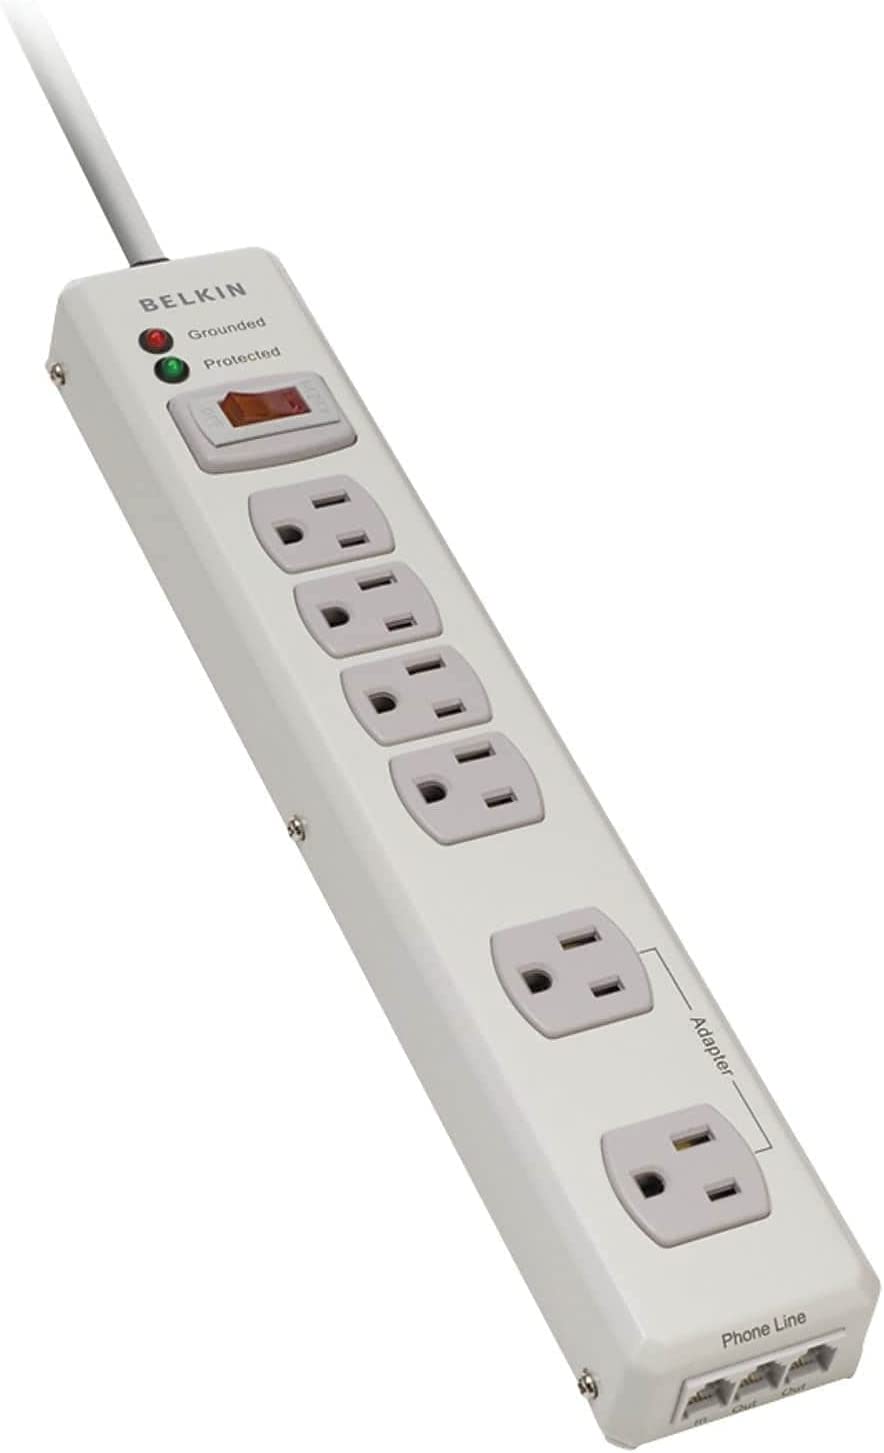 Belkin F9h62006mtl Surge Protector, 6 Outlets, 1045 Joules, 6-Ft Cord, Putty